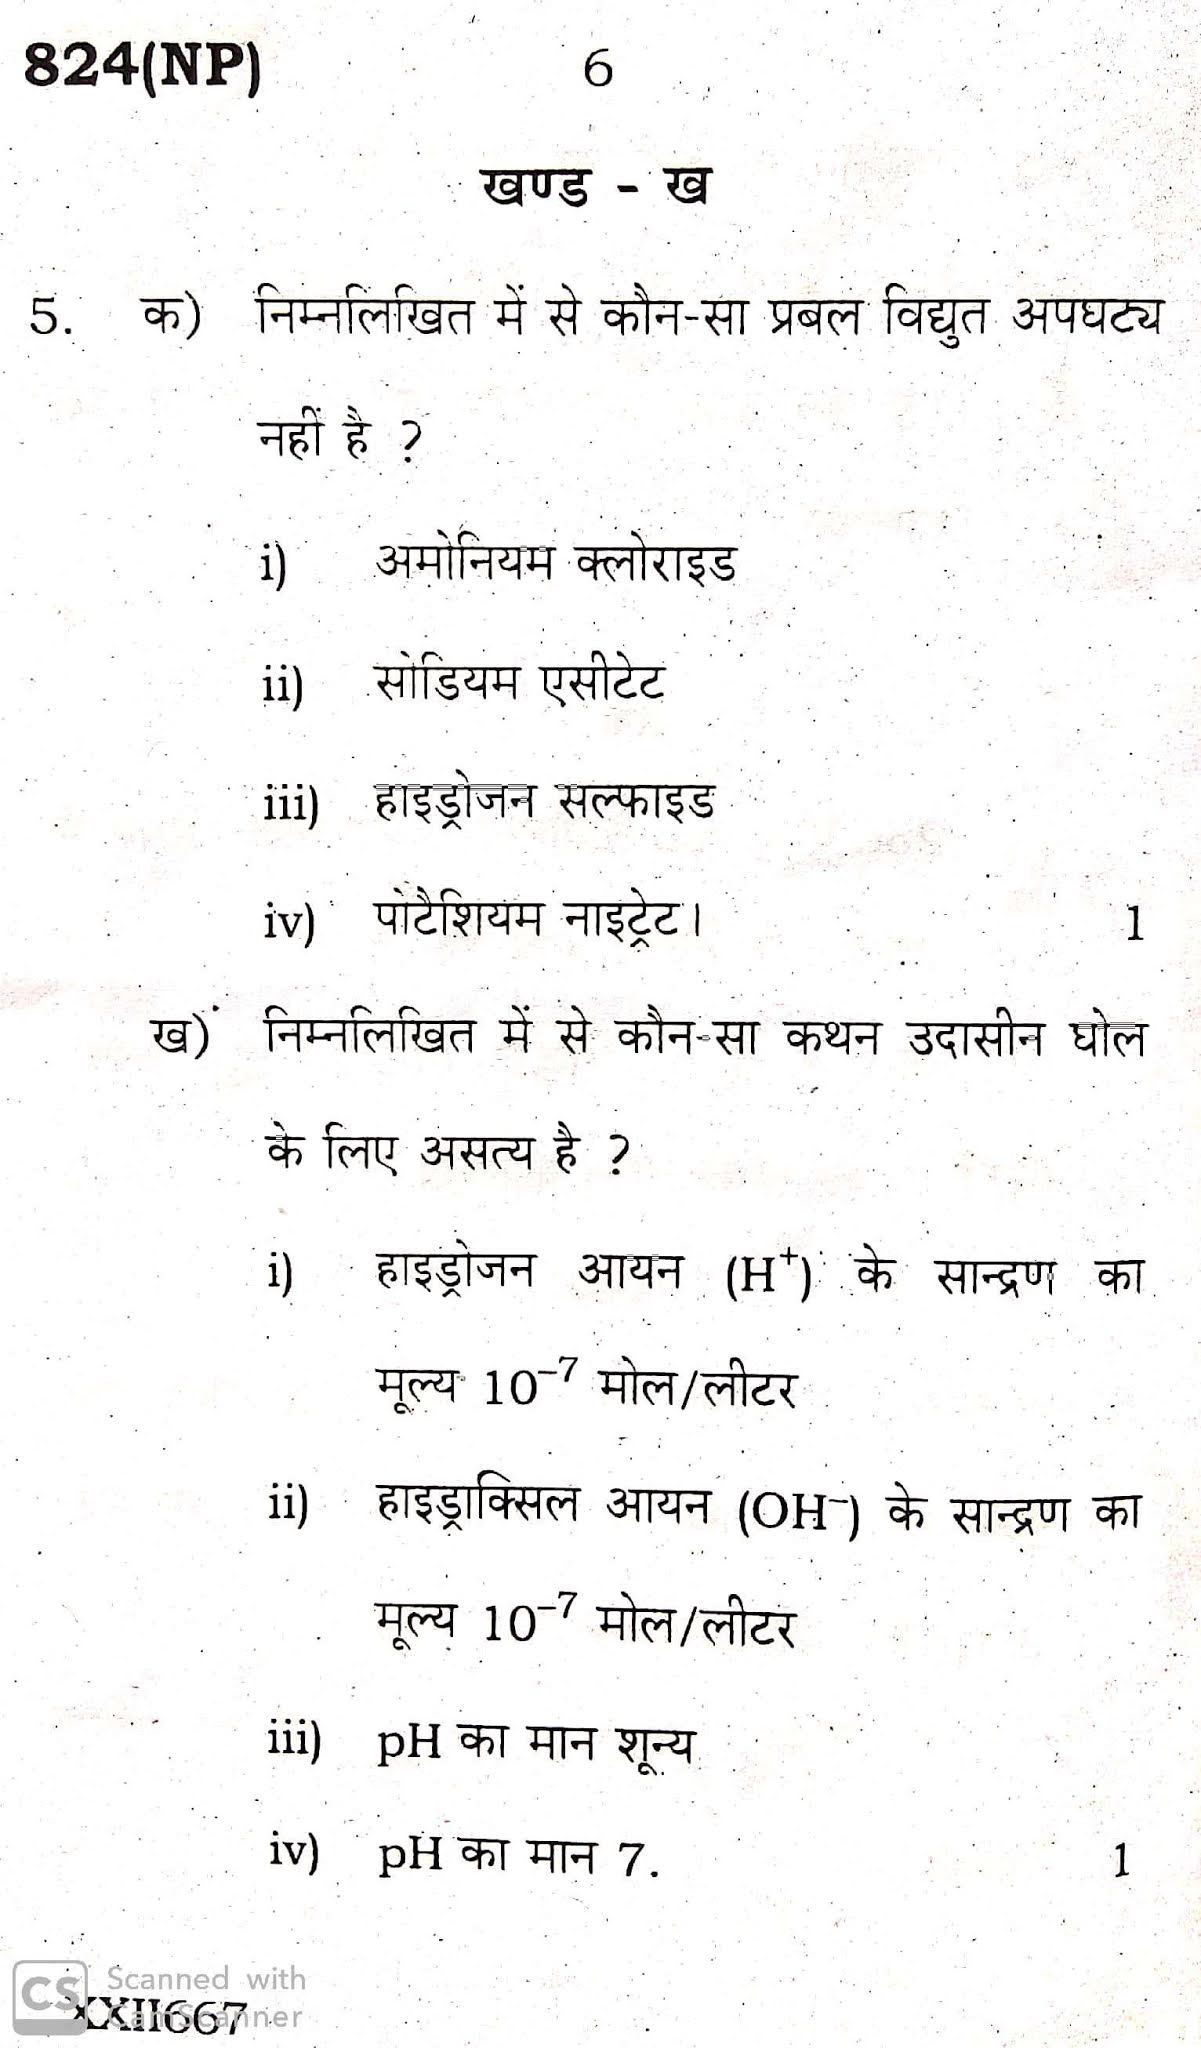 Science, UP Board Question paper for 10th (High school), 2020 Examination